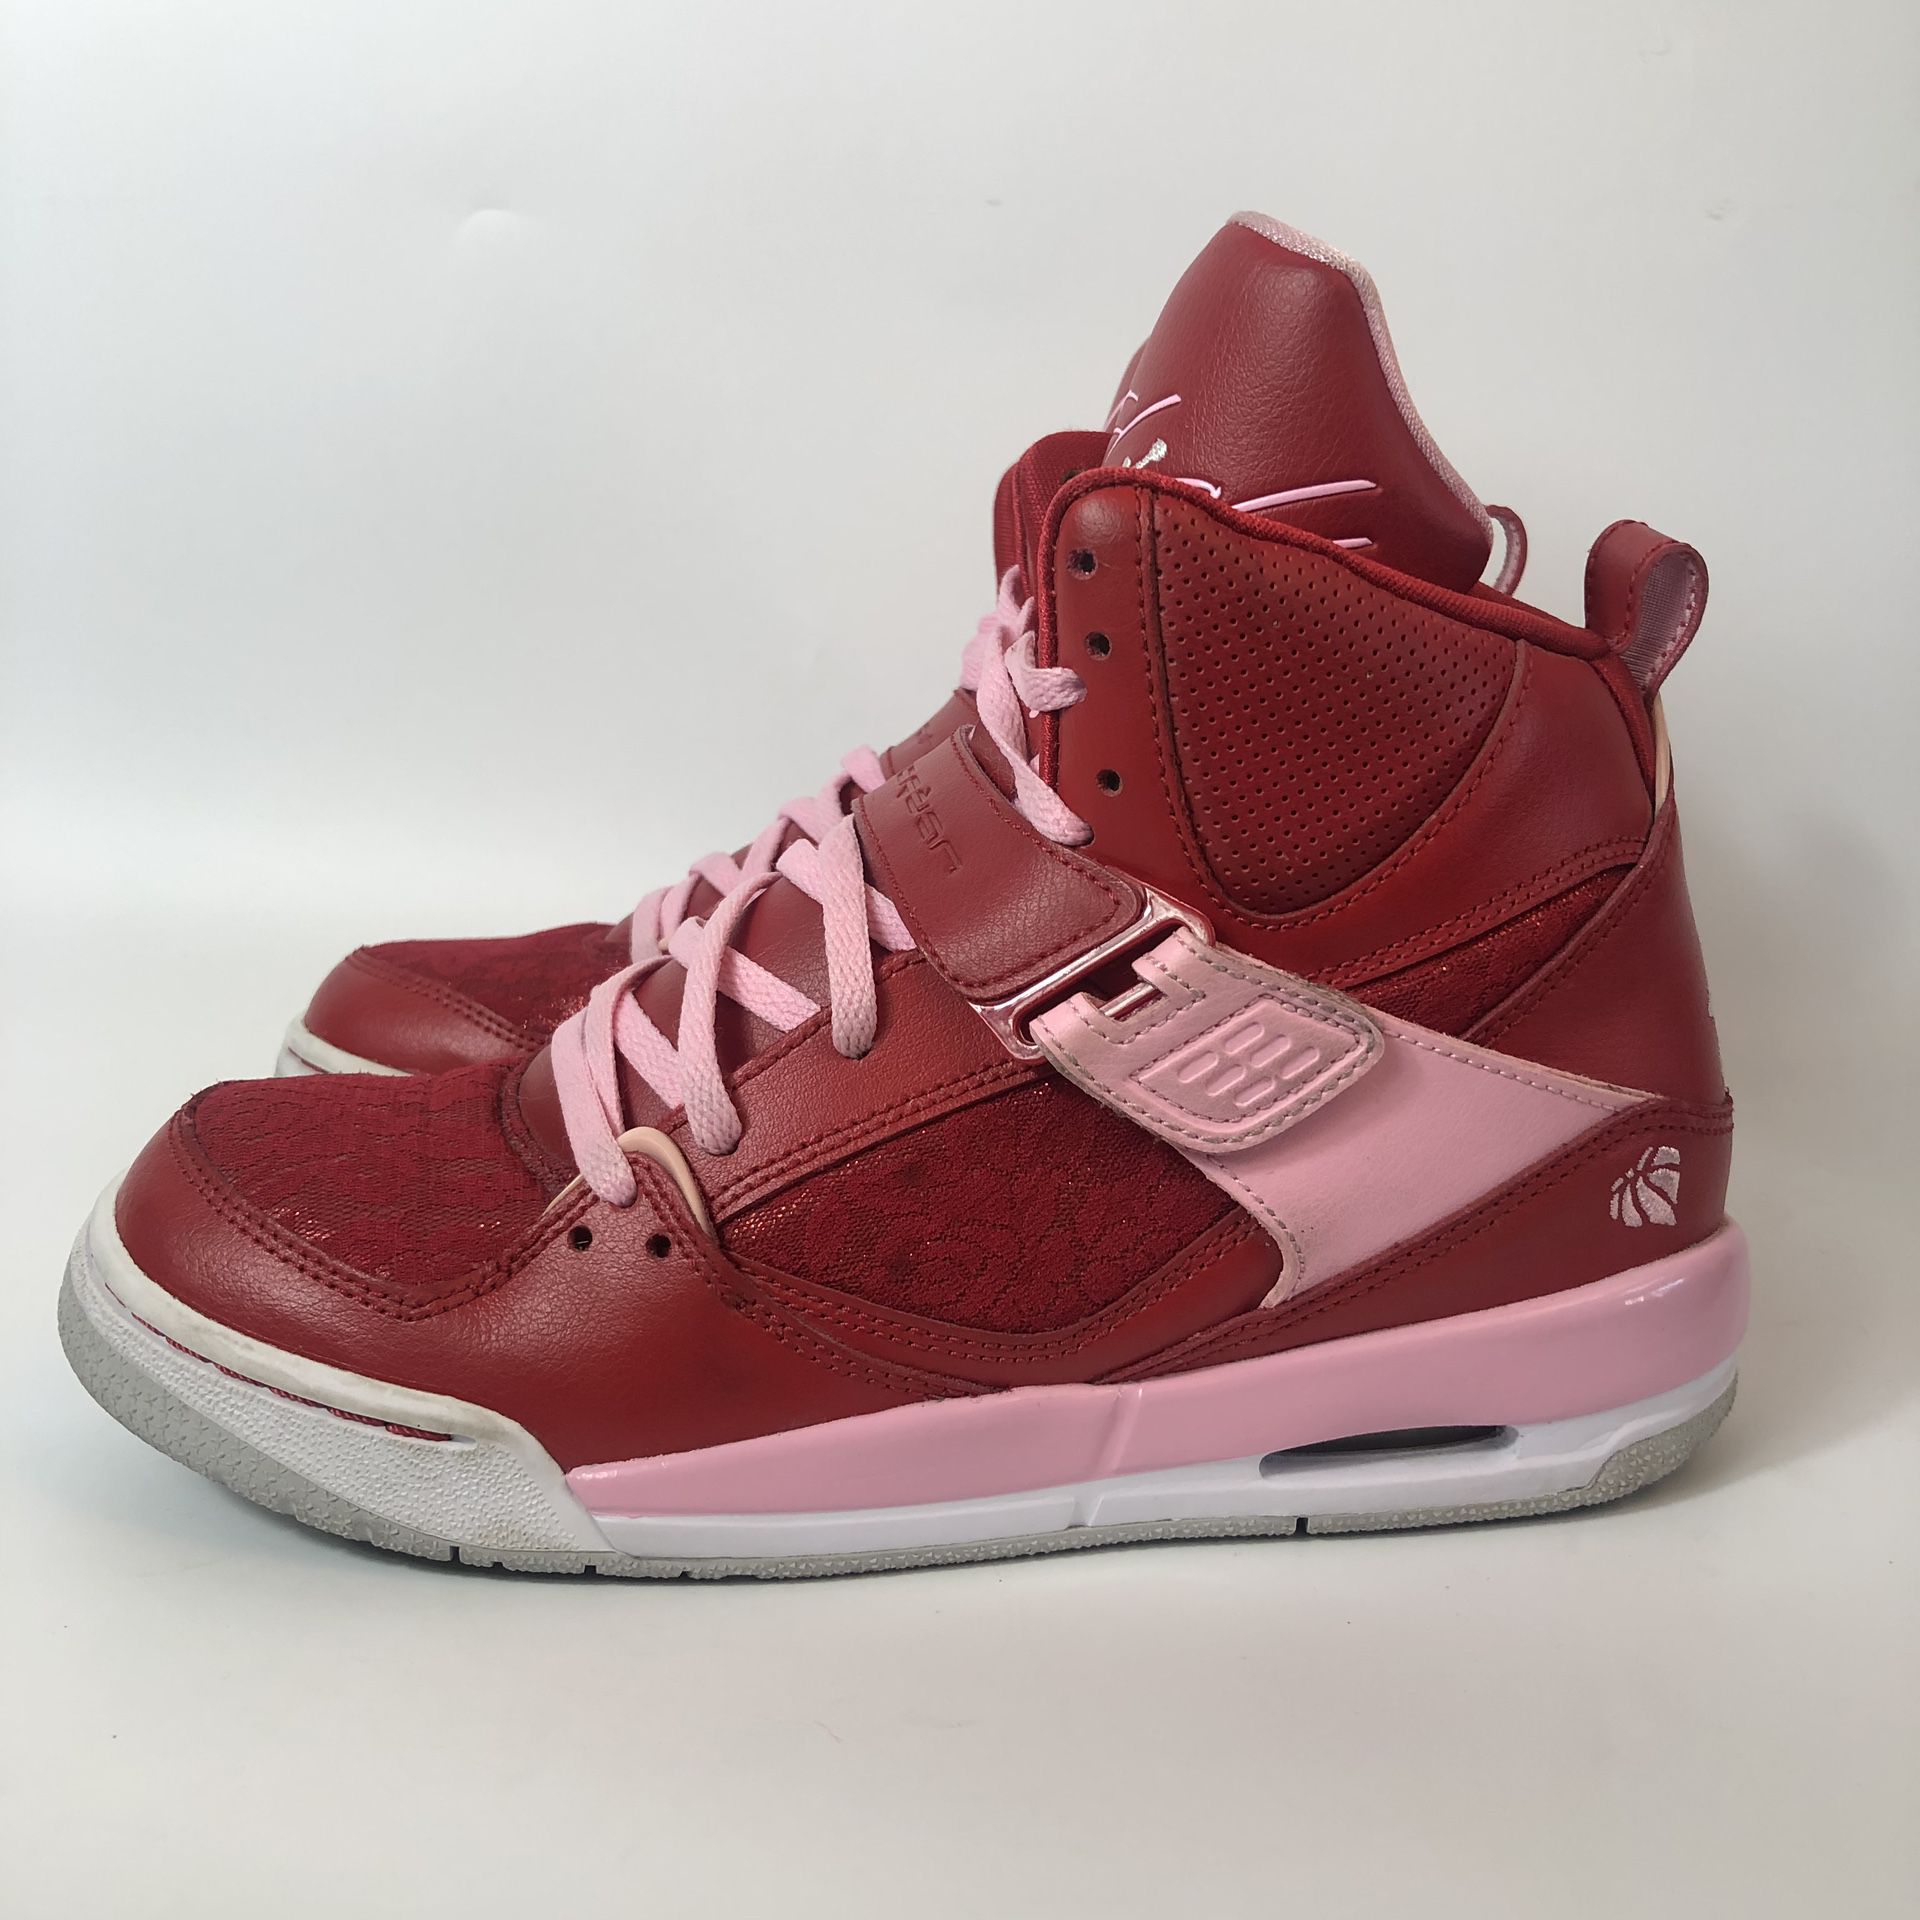 Nike Air Flight 45 High Girls Size 7Y Red/Pink V-Day 547769-605 for Long Beach, CA - OfferUp